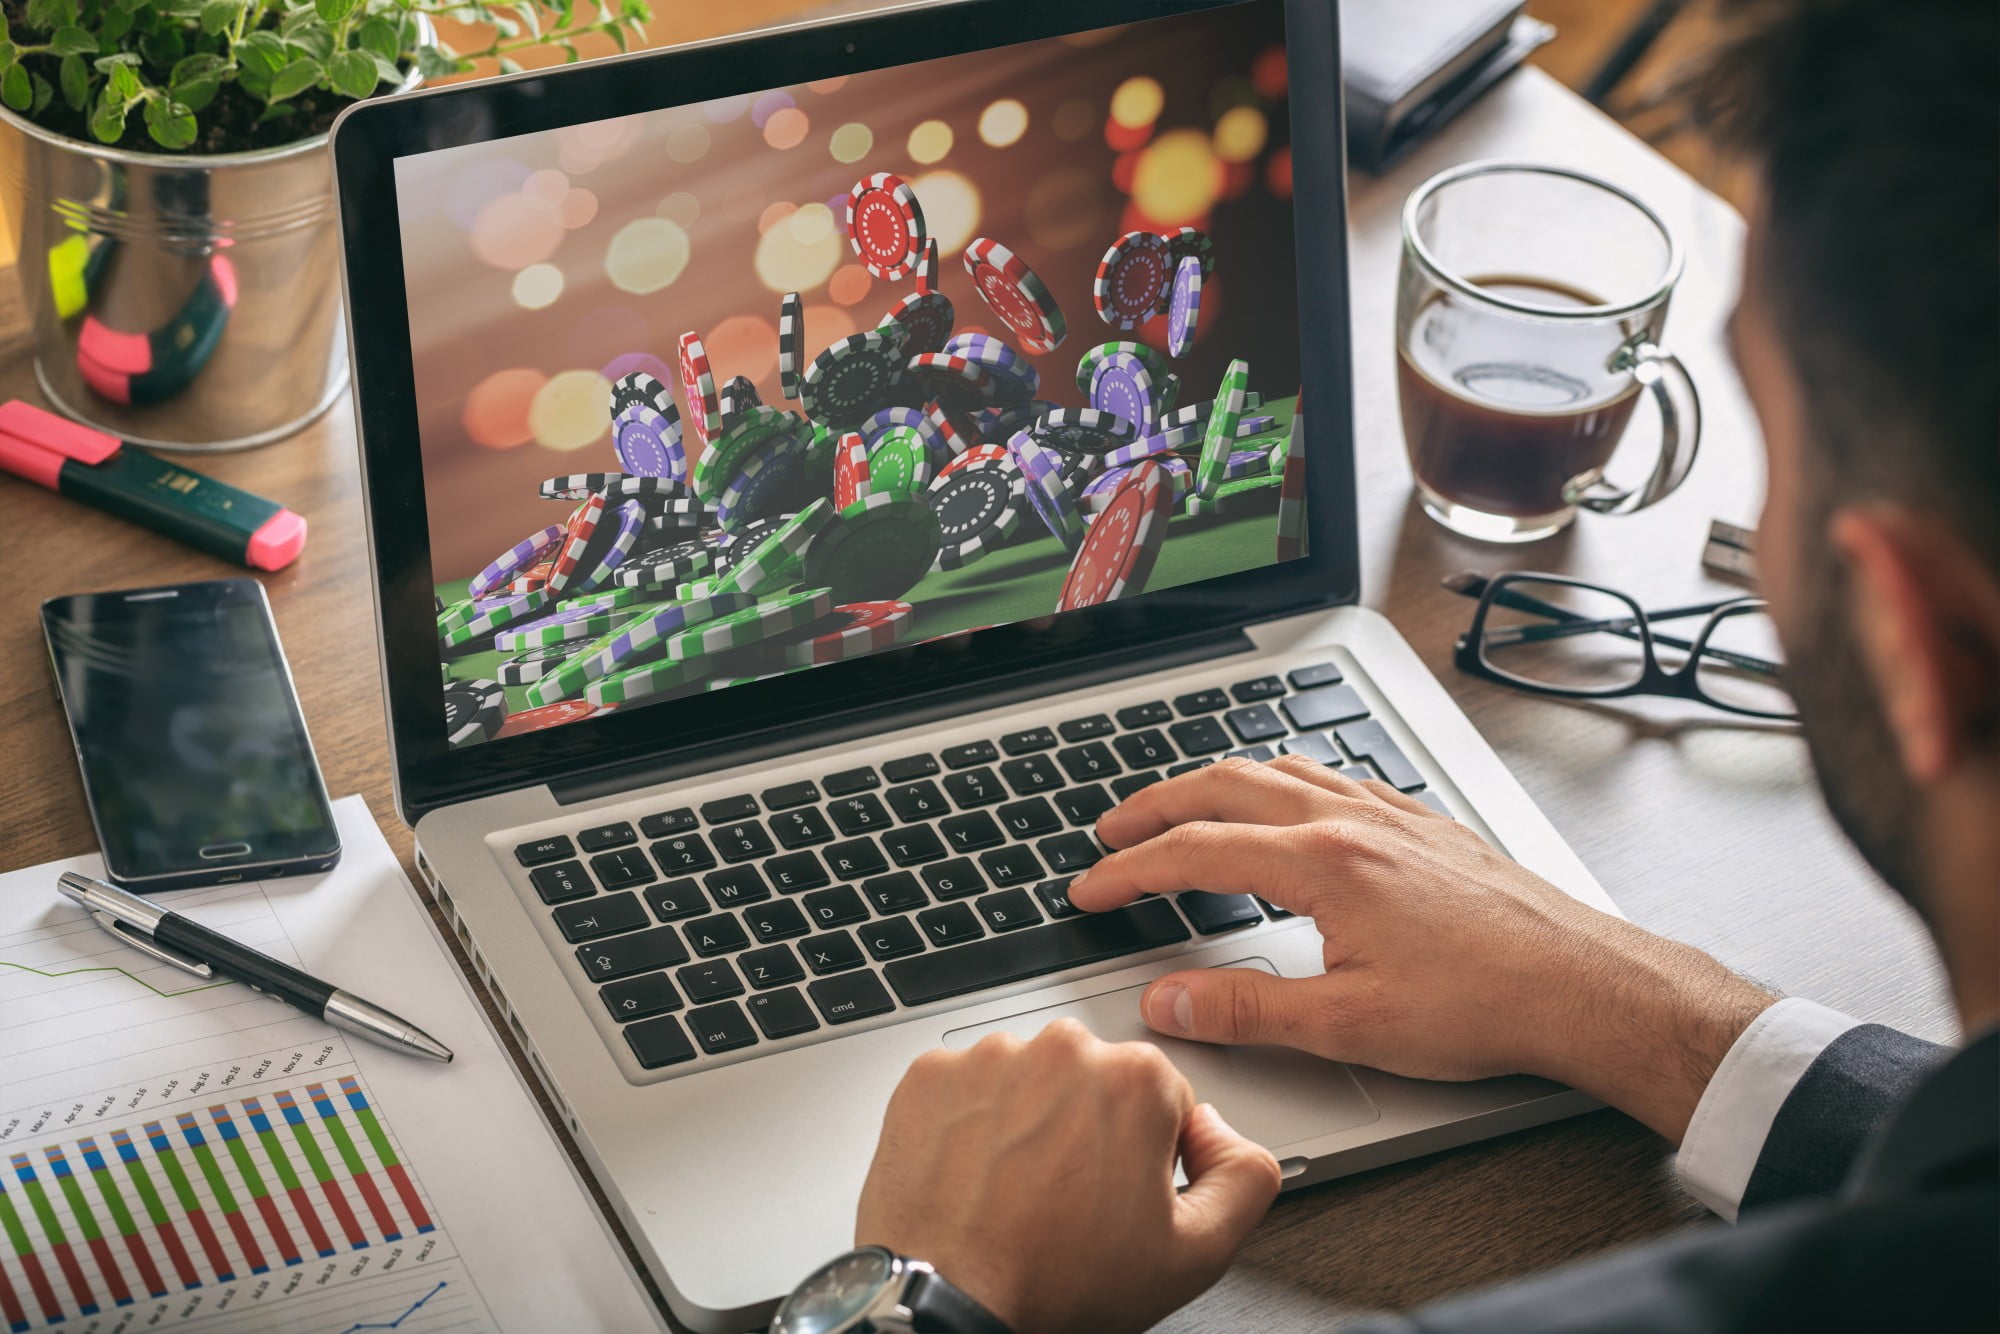 Gambling has never been more accessible with the rise of online casinos. Read on to discover five of the most popular types of gambling you can play online.